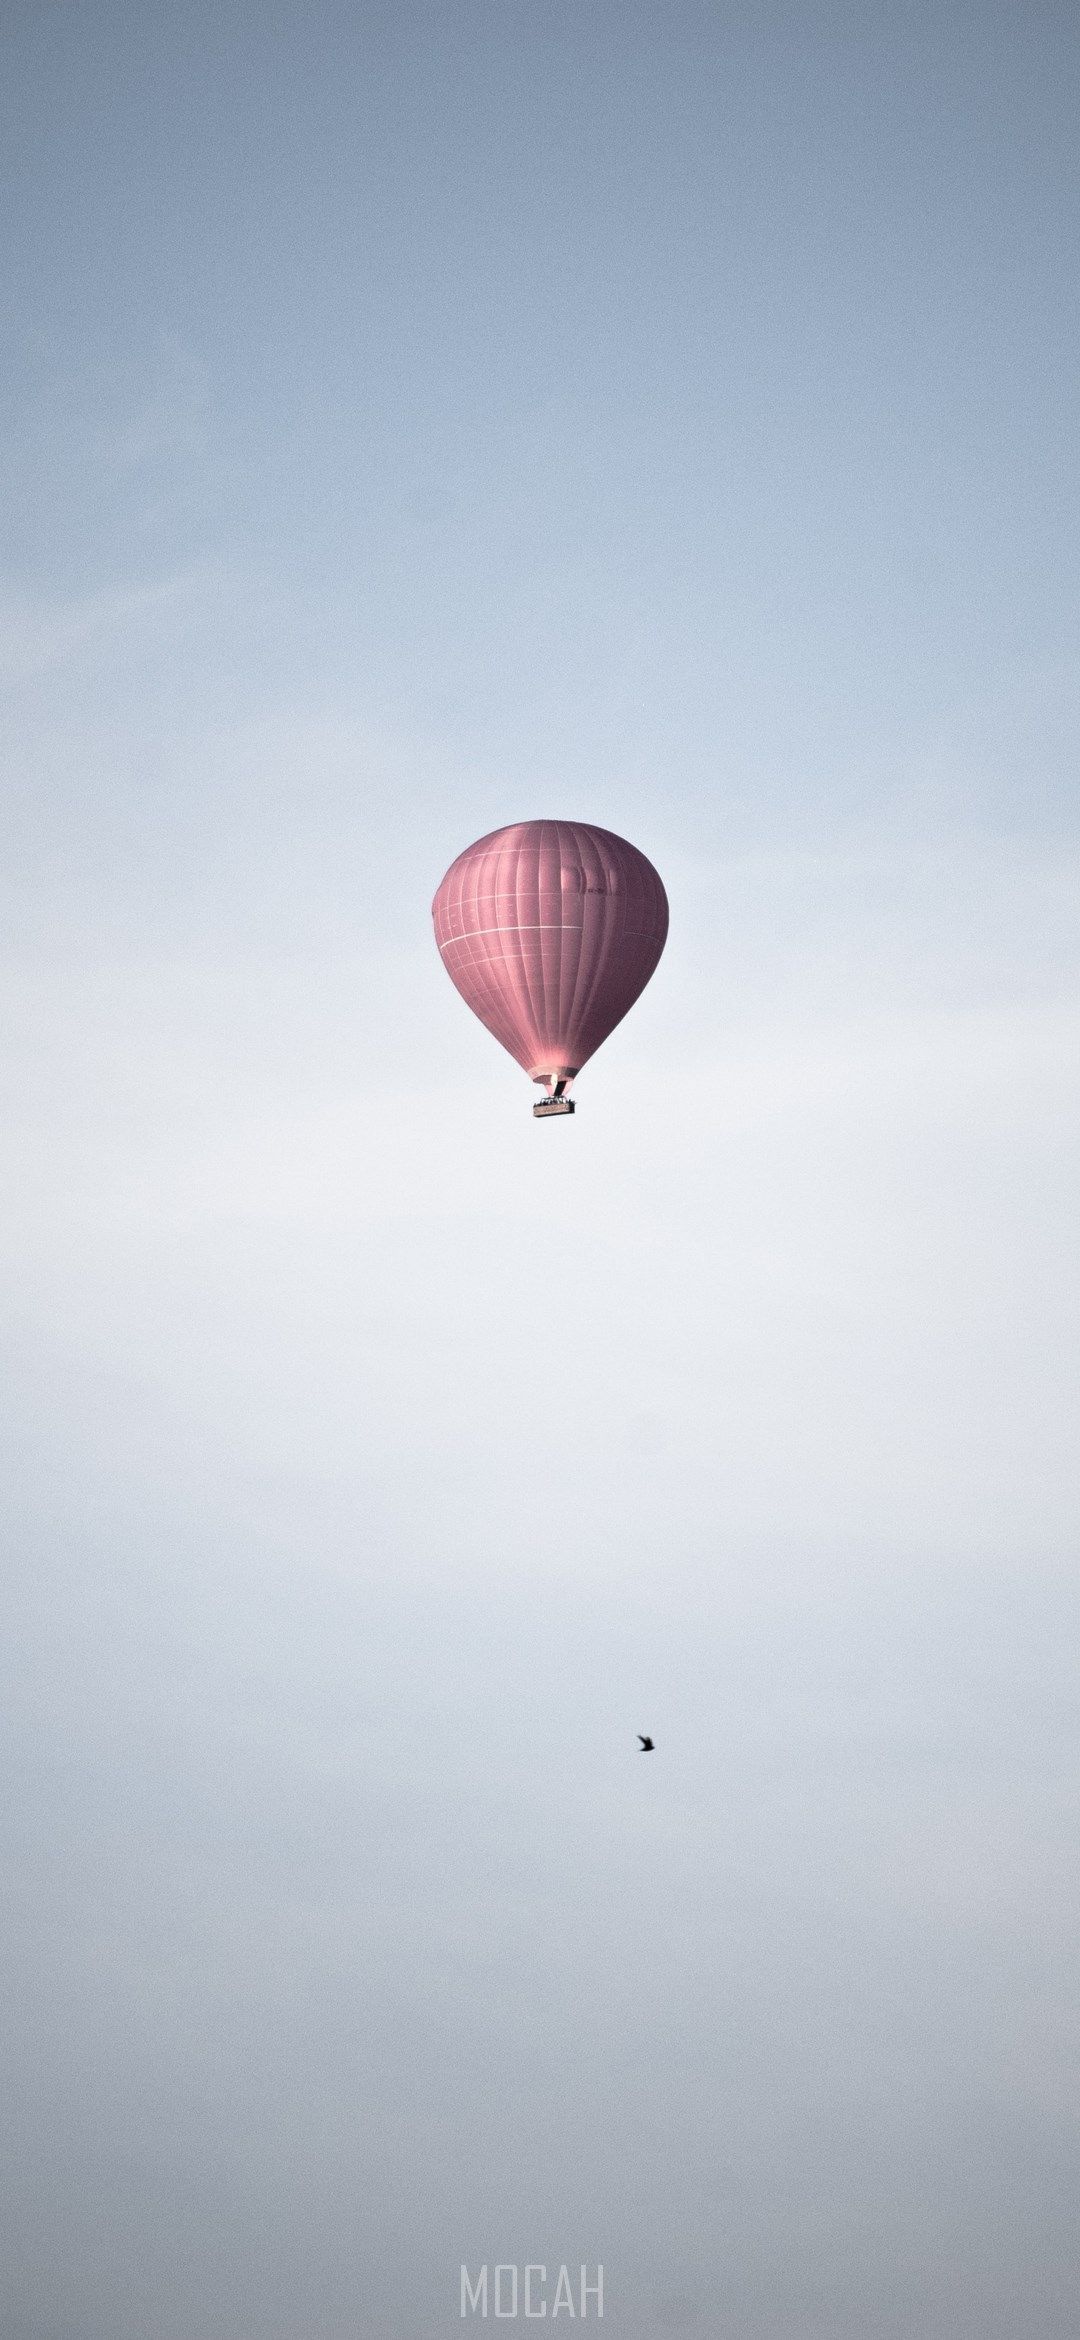 A hot air balloon flying in the sky - Hot air balloons